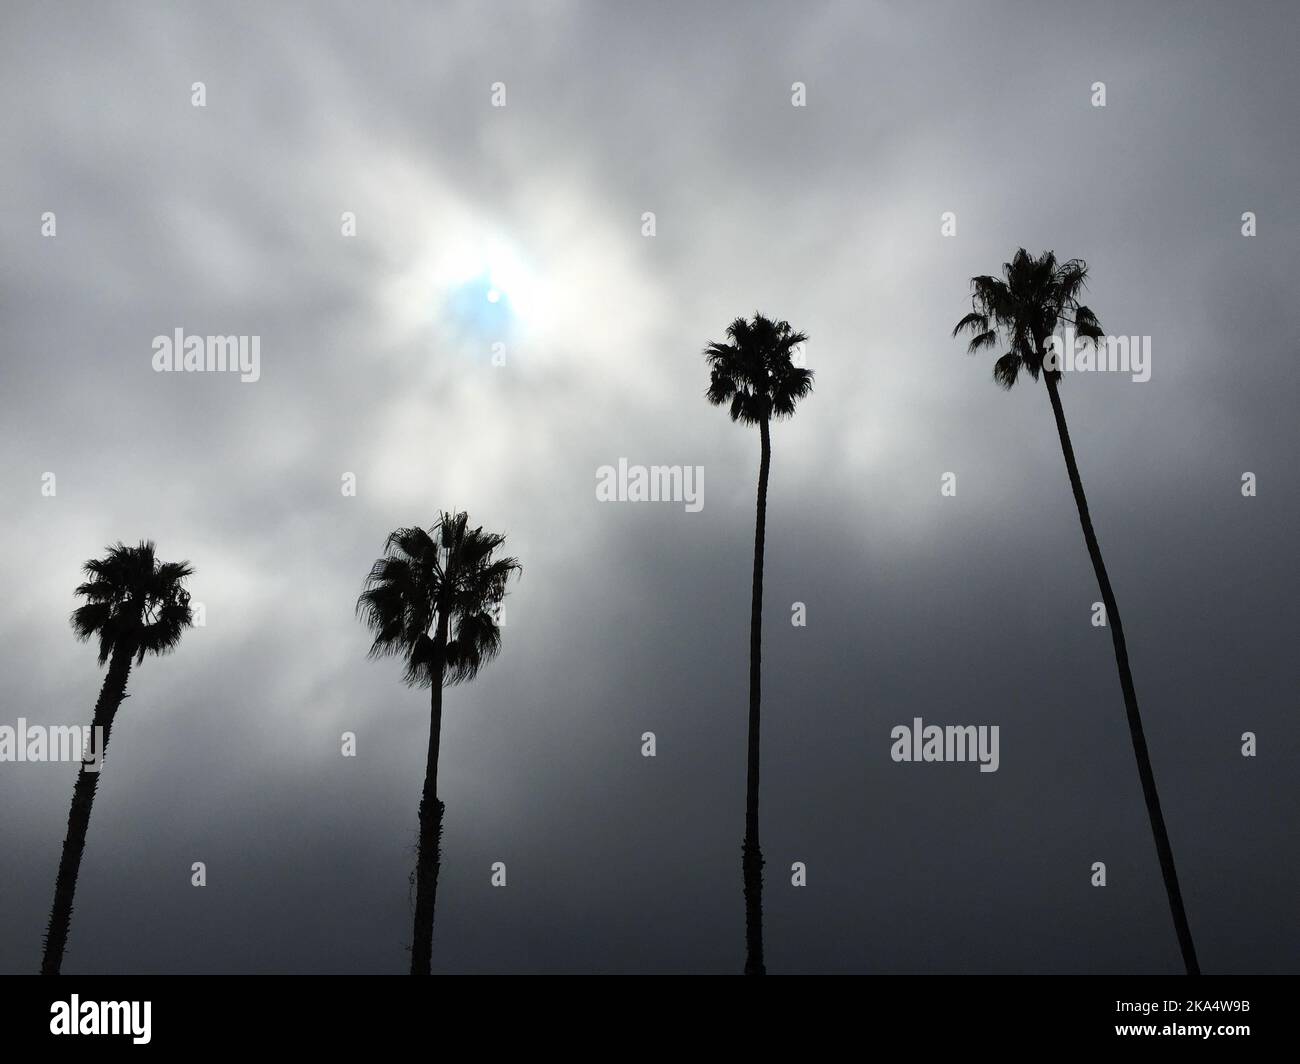 Low angle silhouette of four palm trees in a row on a grey day with sun breaking through clouds, Santa Barbara, California, USA Stock Photo